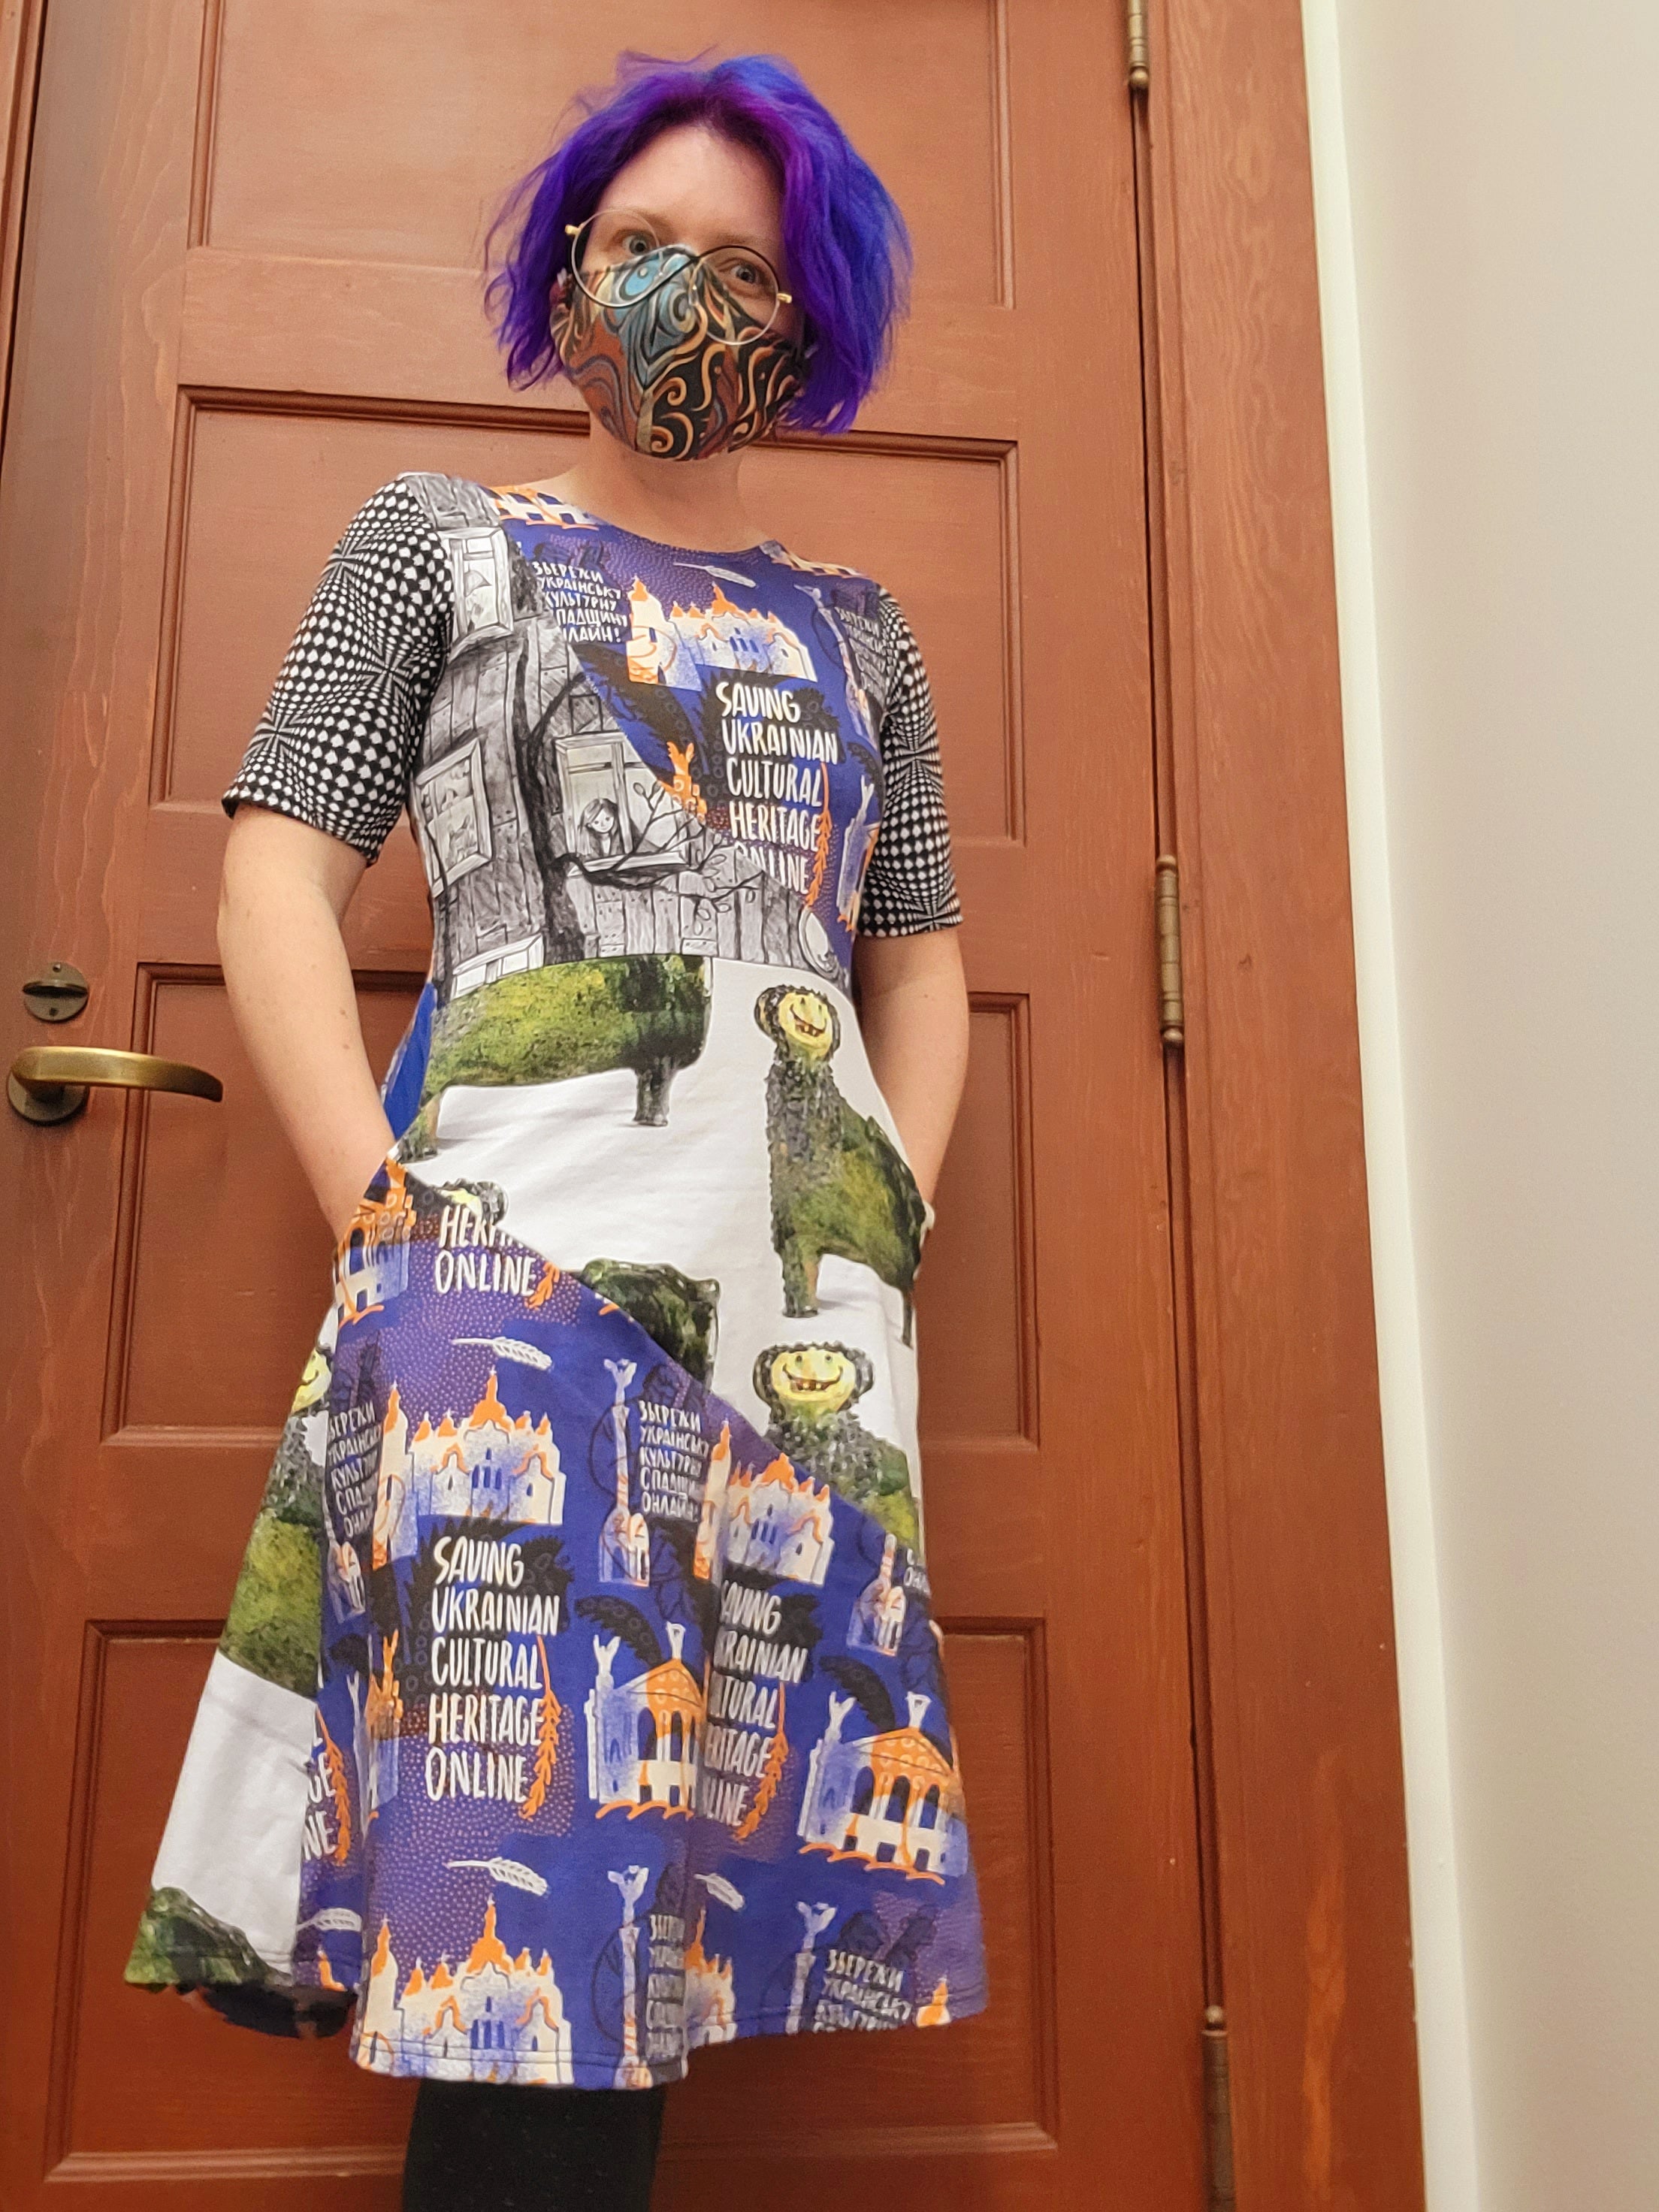 Quinn Dombrowski in a dress inspired by SUCHO they made. It features artwork commissioned for the project and a two-faced lion sculpture from the National Folk Decorative Art Museum. (Photo: Courtesy of Quinn Dombrowski)